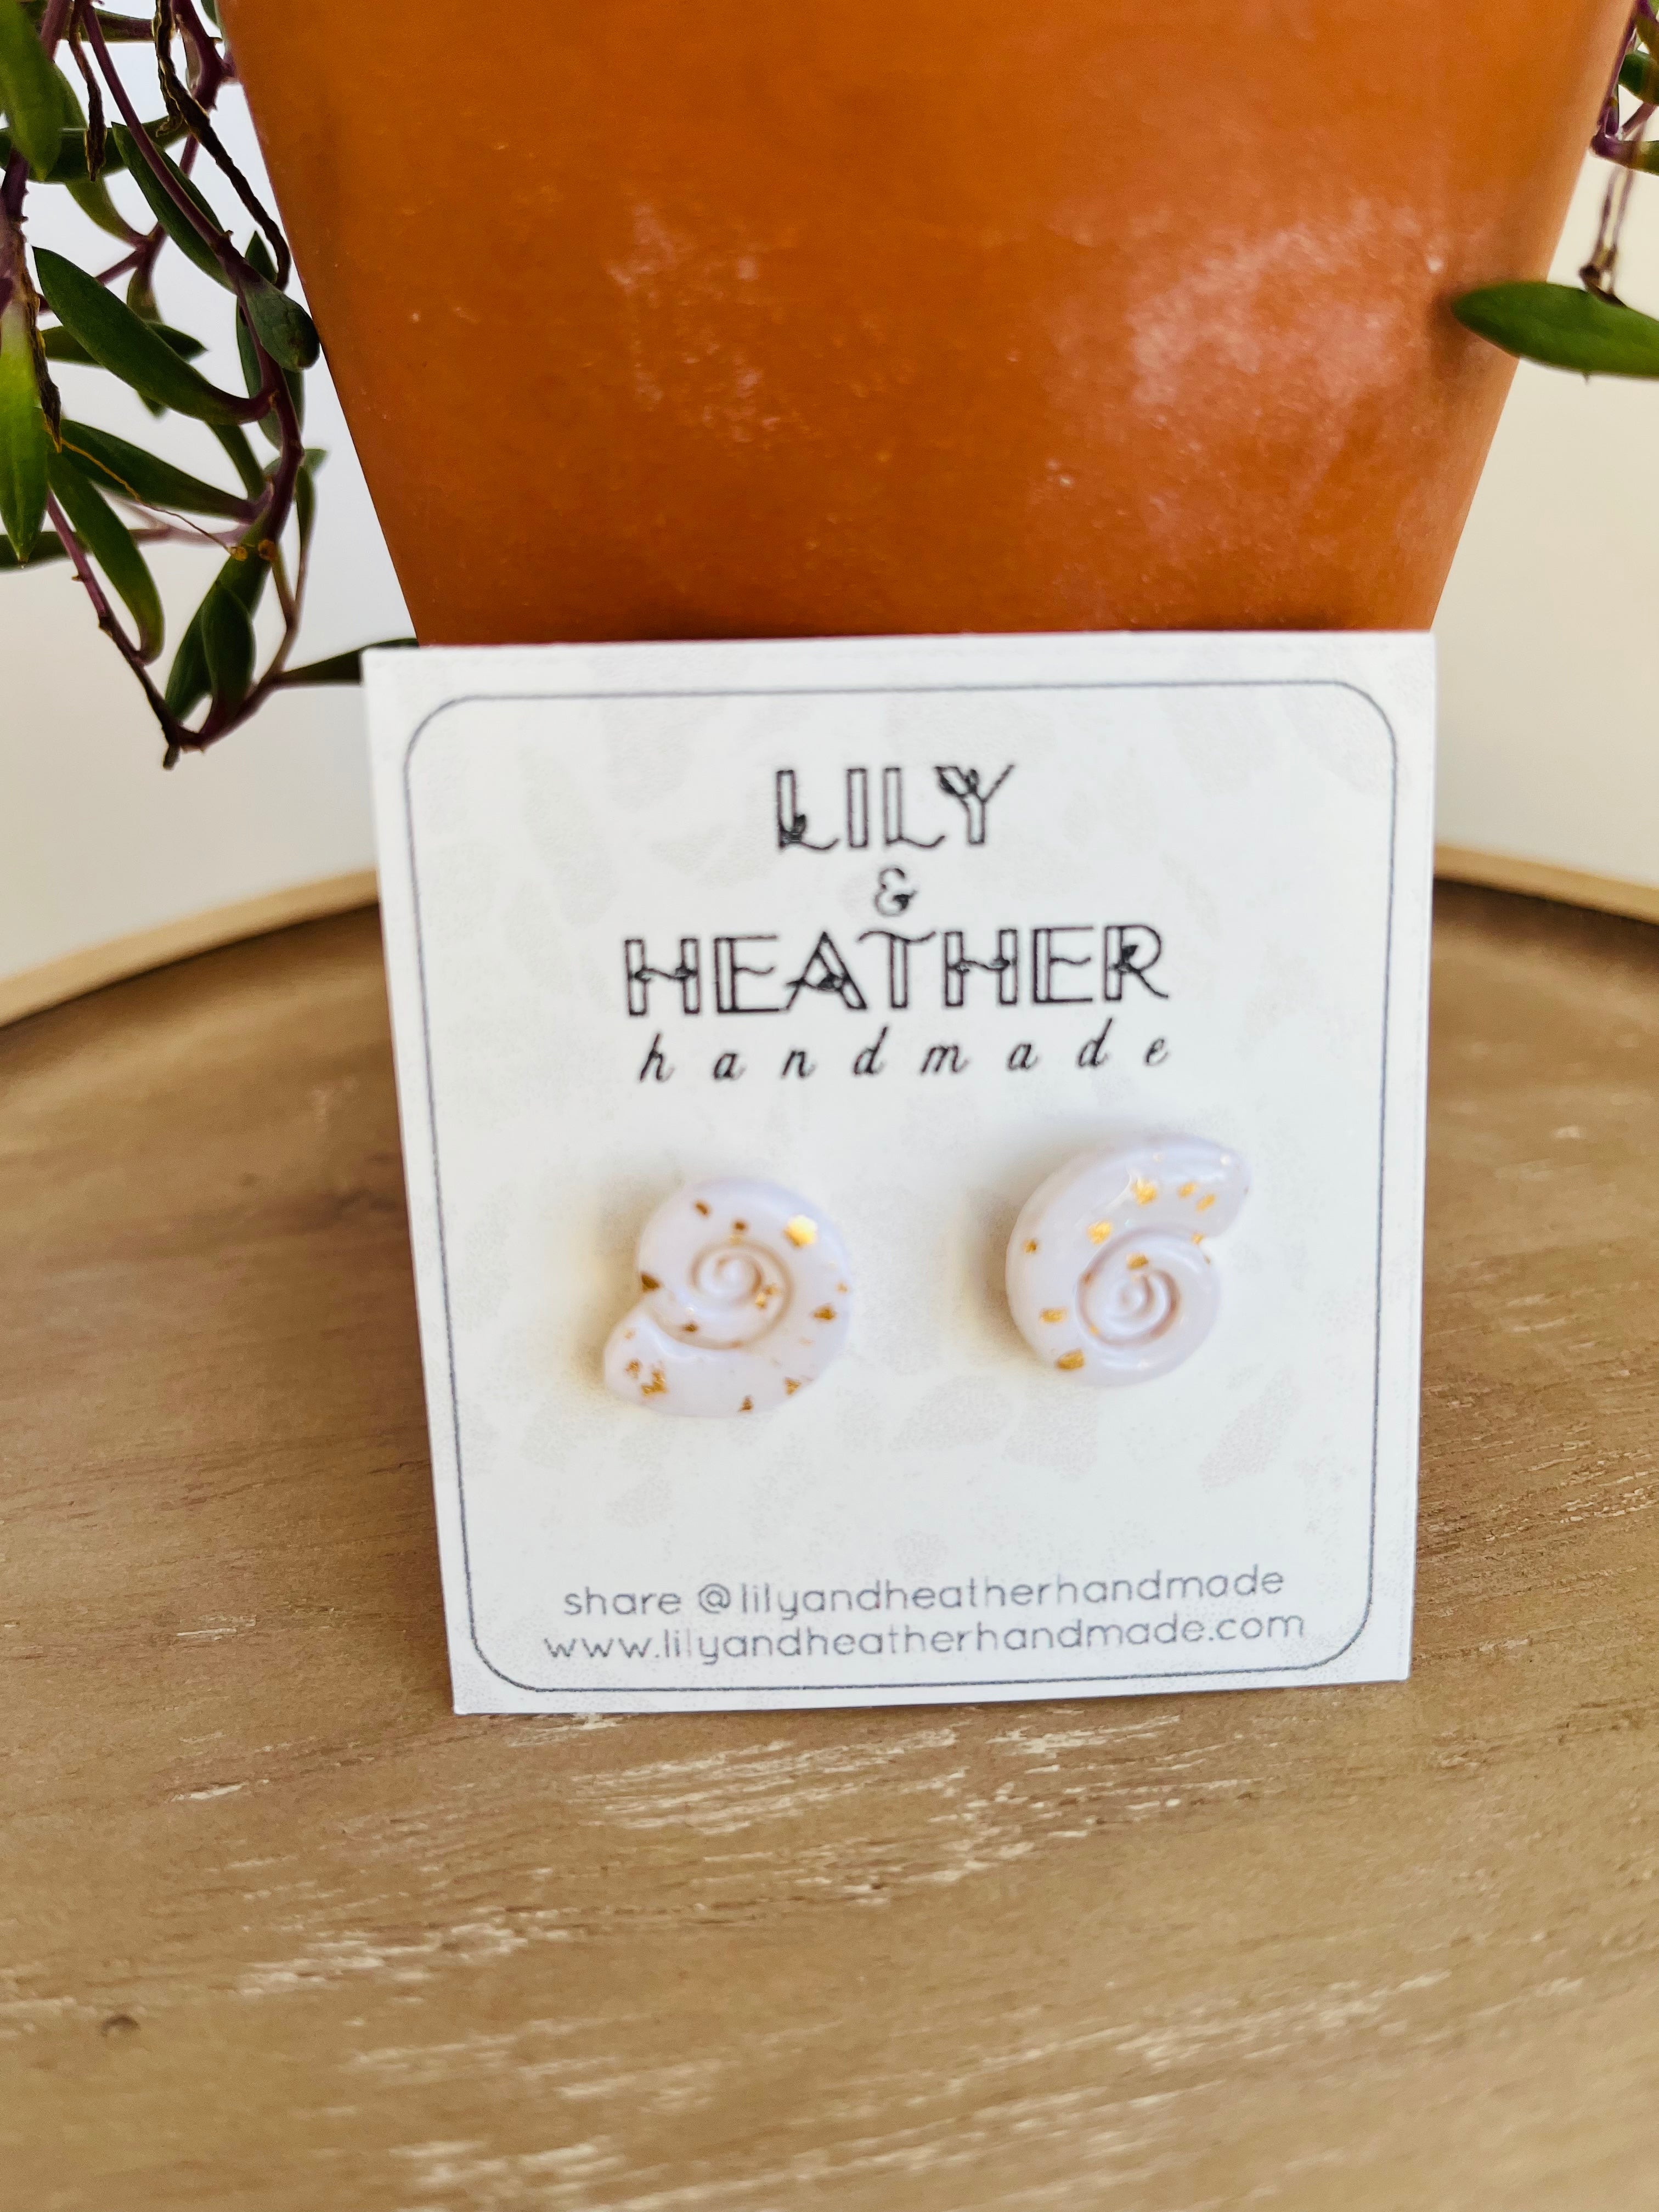 Spiral shells - earrings from Lily & Heather Handmade